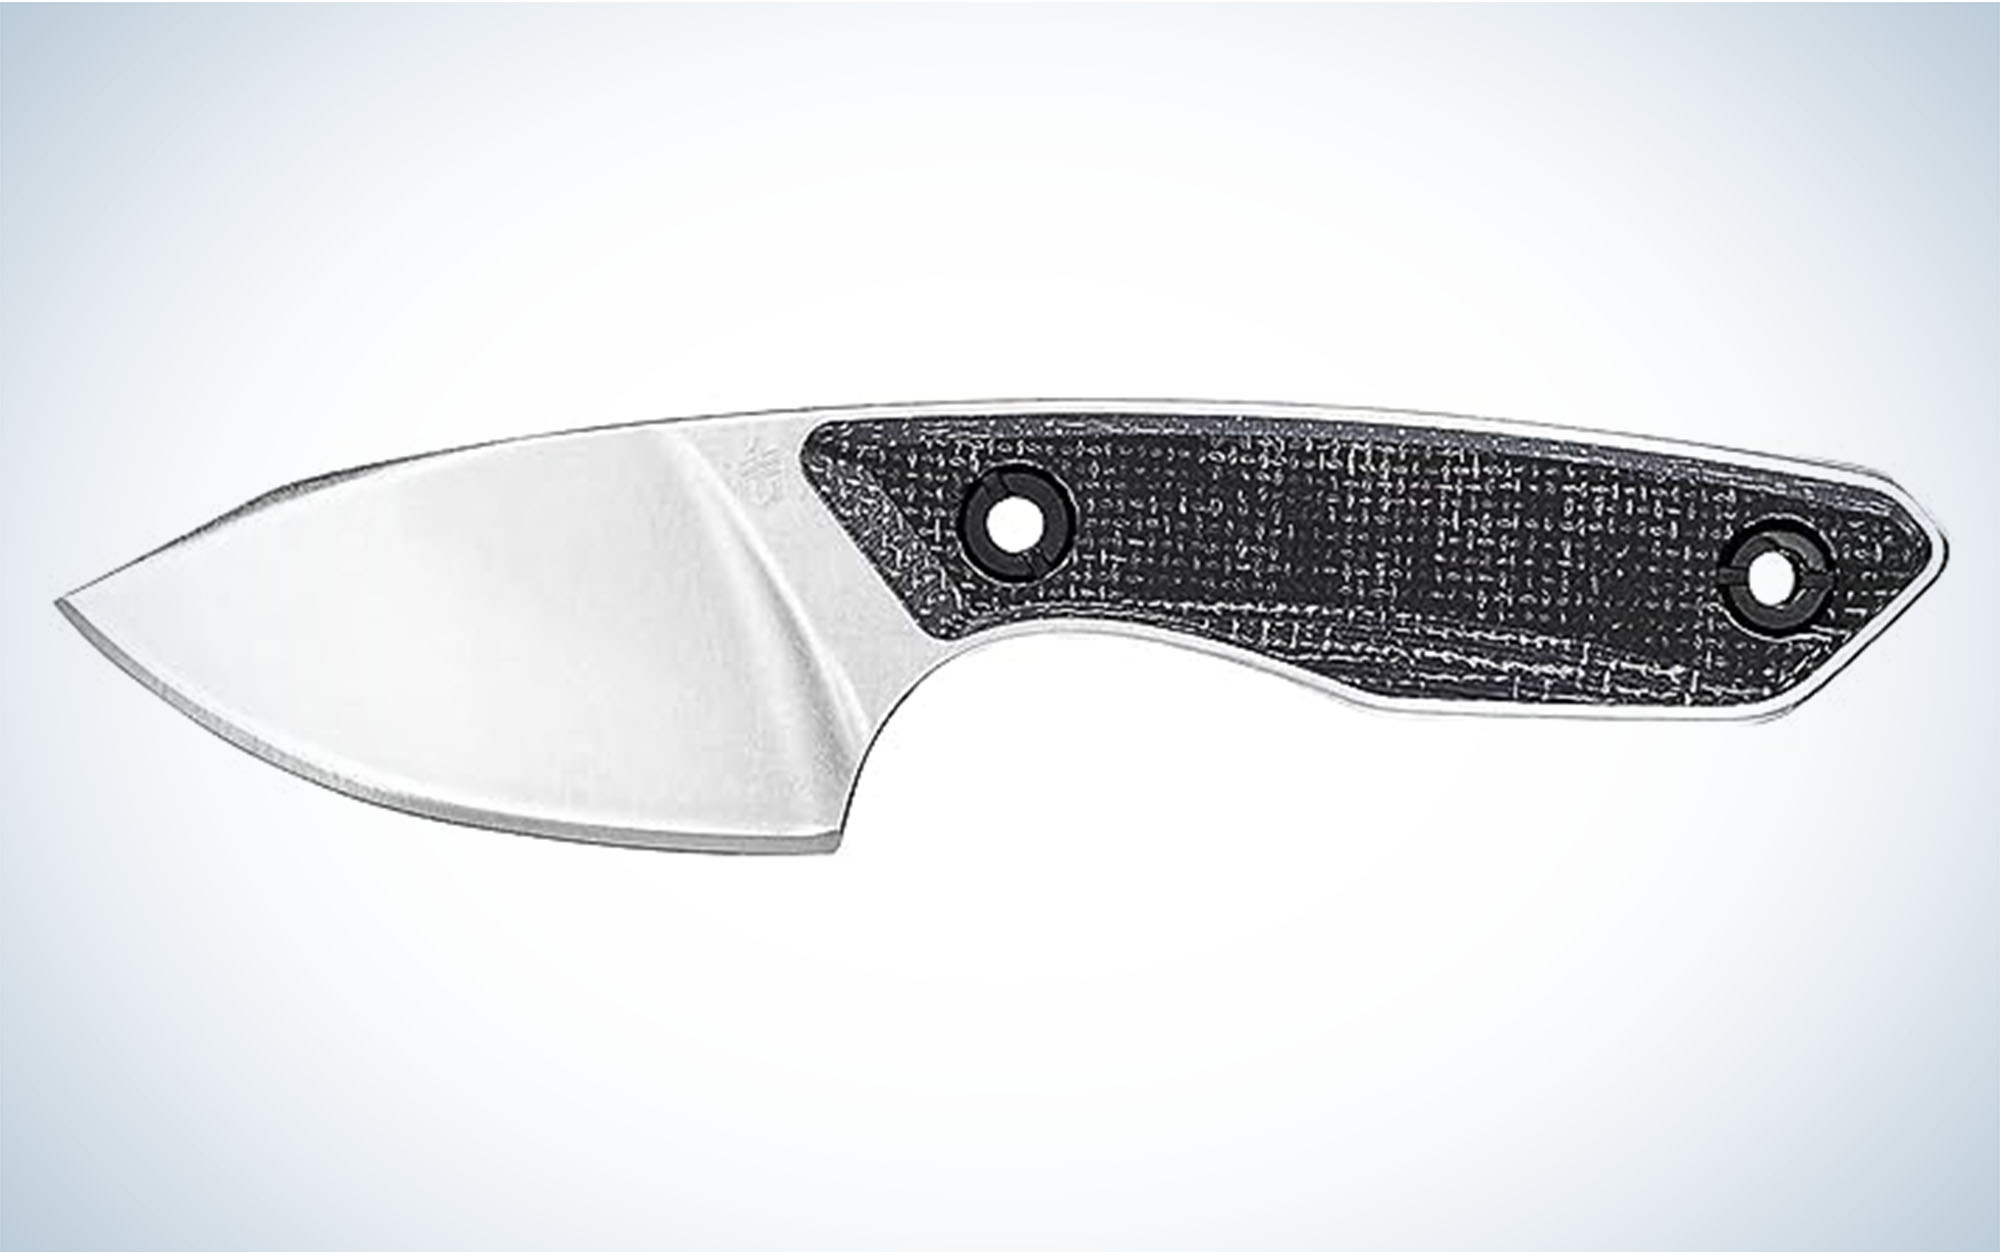 We tested the Gerber Stowe.